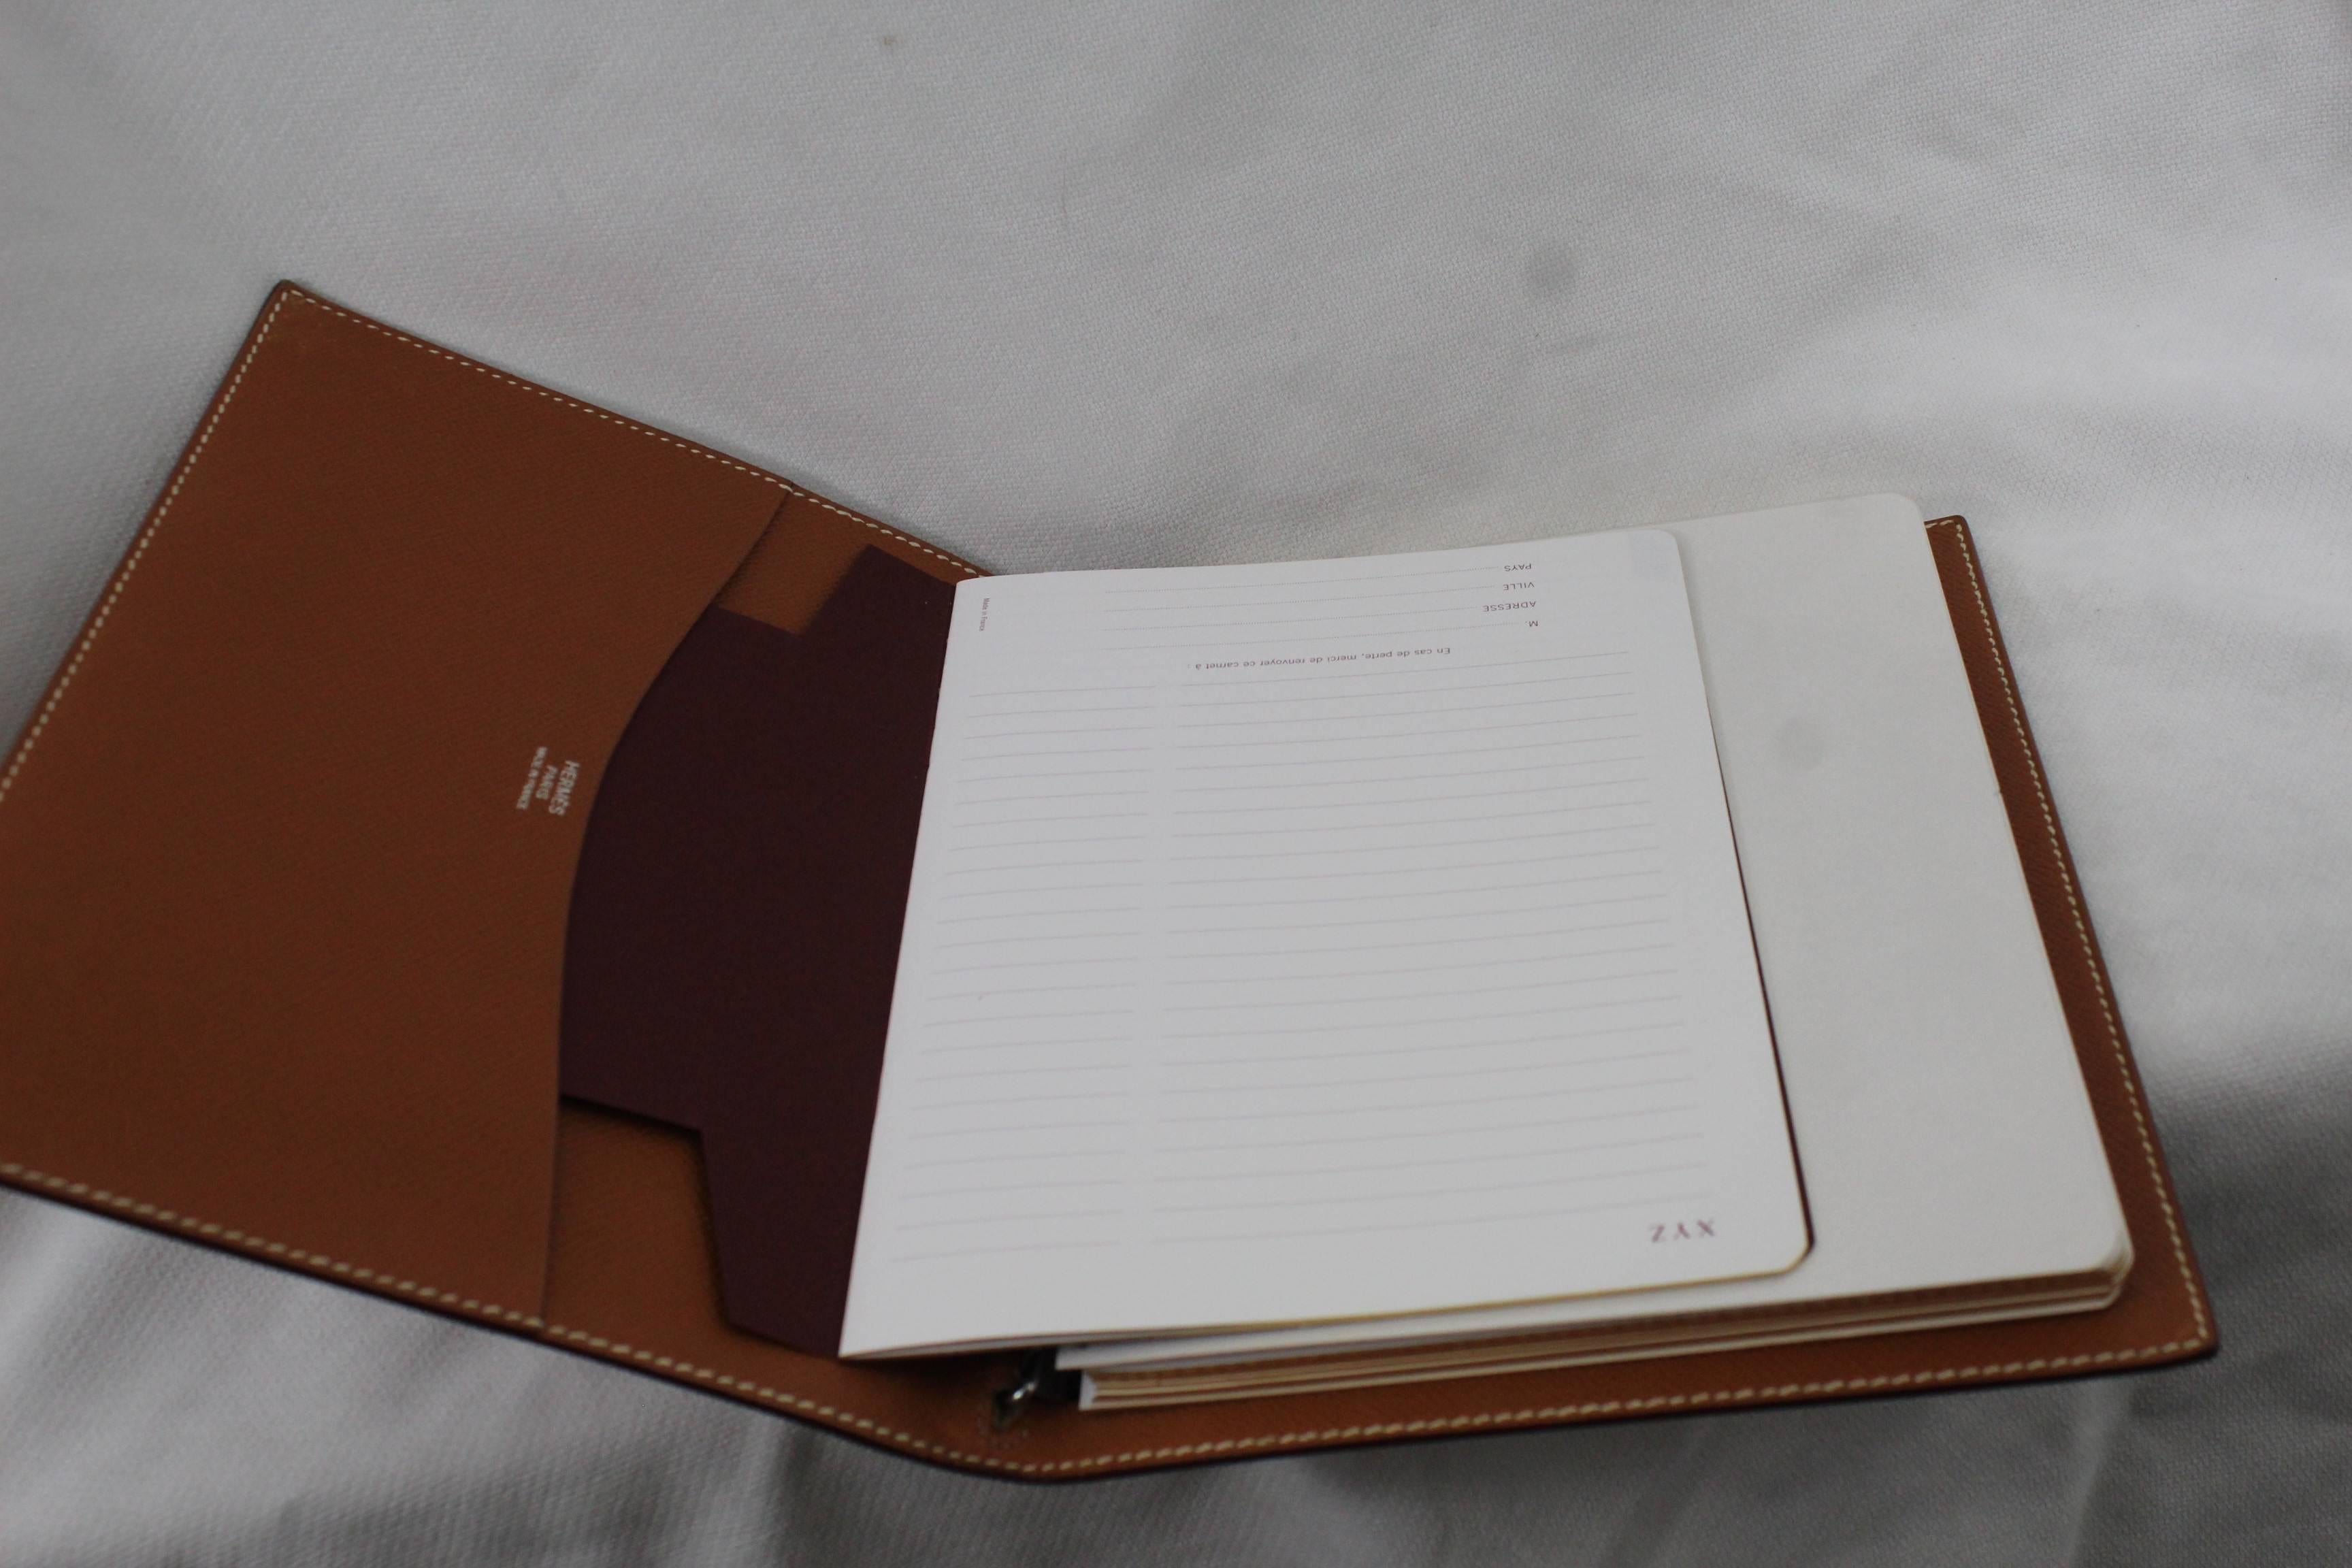 Nice Hermes Agenda cover in gold graine dleather.

Calendar is fom 2012! but tehre are also a telephone listing and small notebook that can be still use

Some mino signs of use.

Size 18 x 23 centimeters